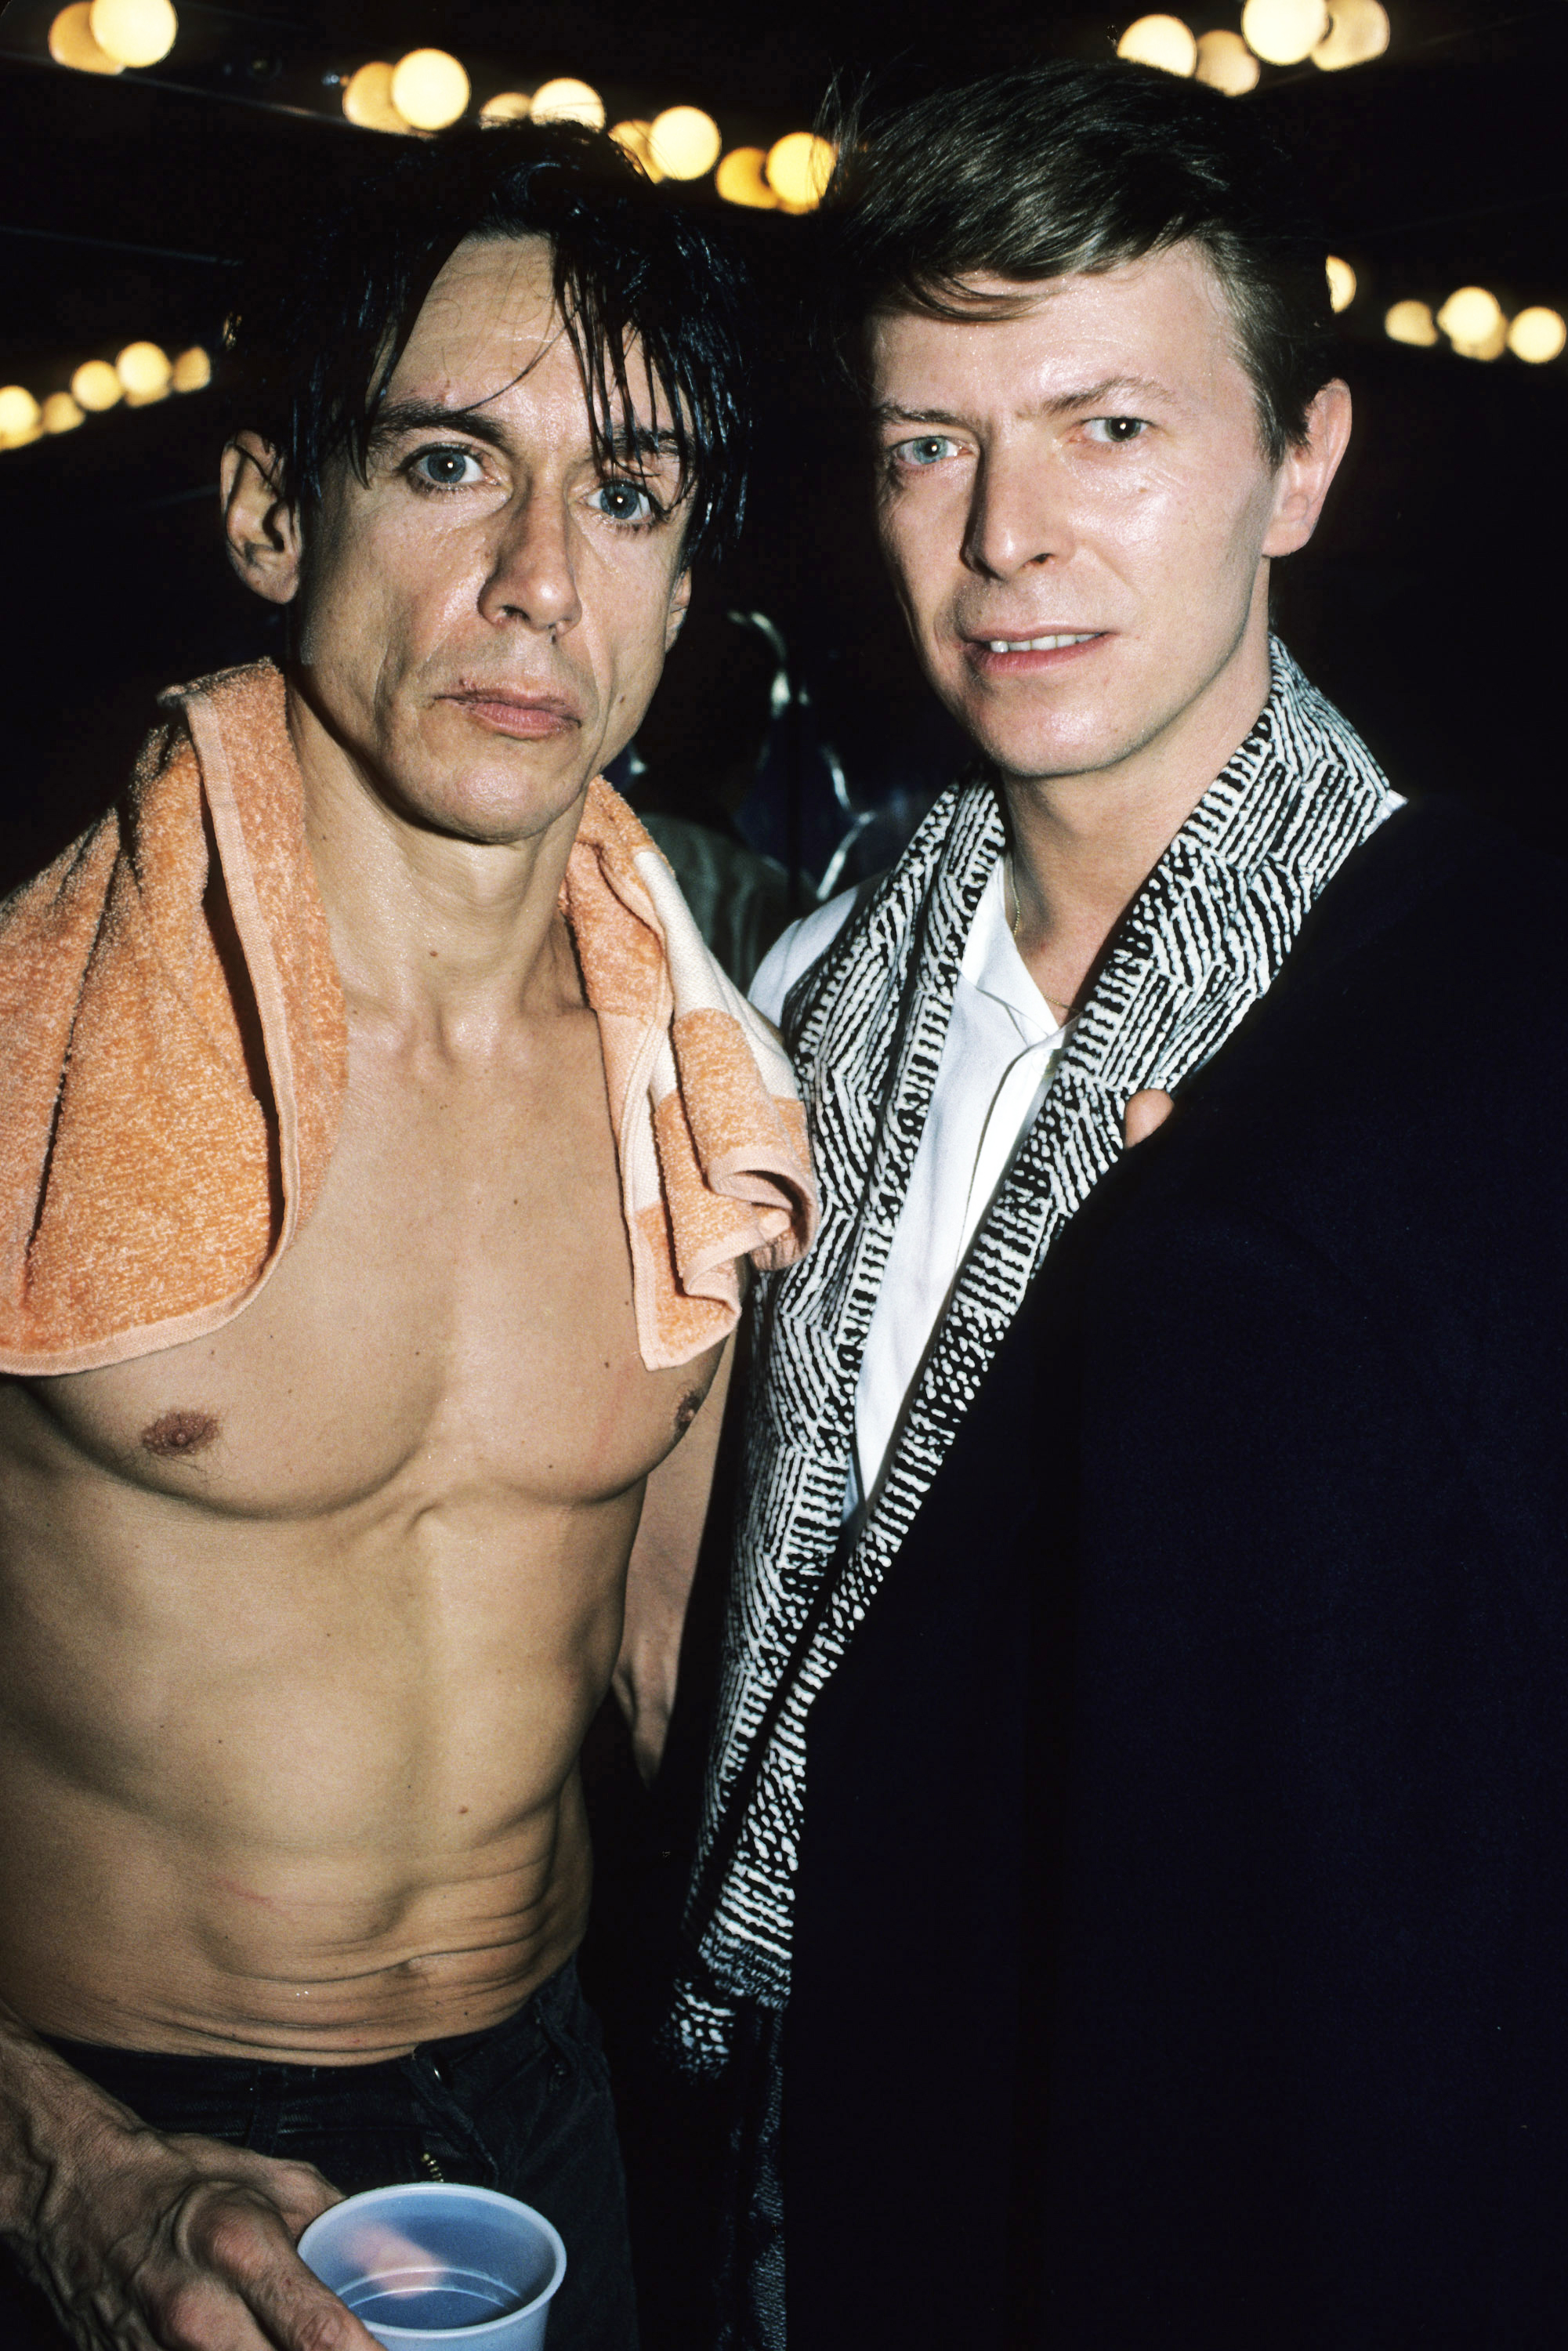 Iggy Pop, The Idiot and Lust for Life, 1977.